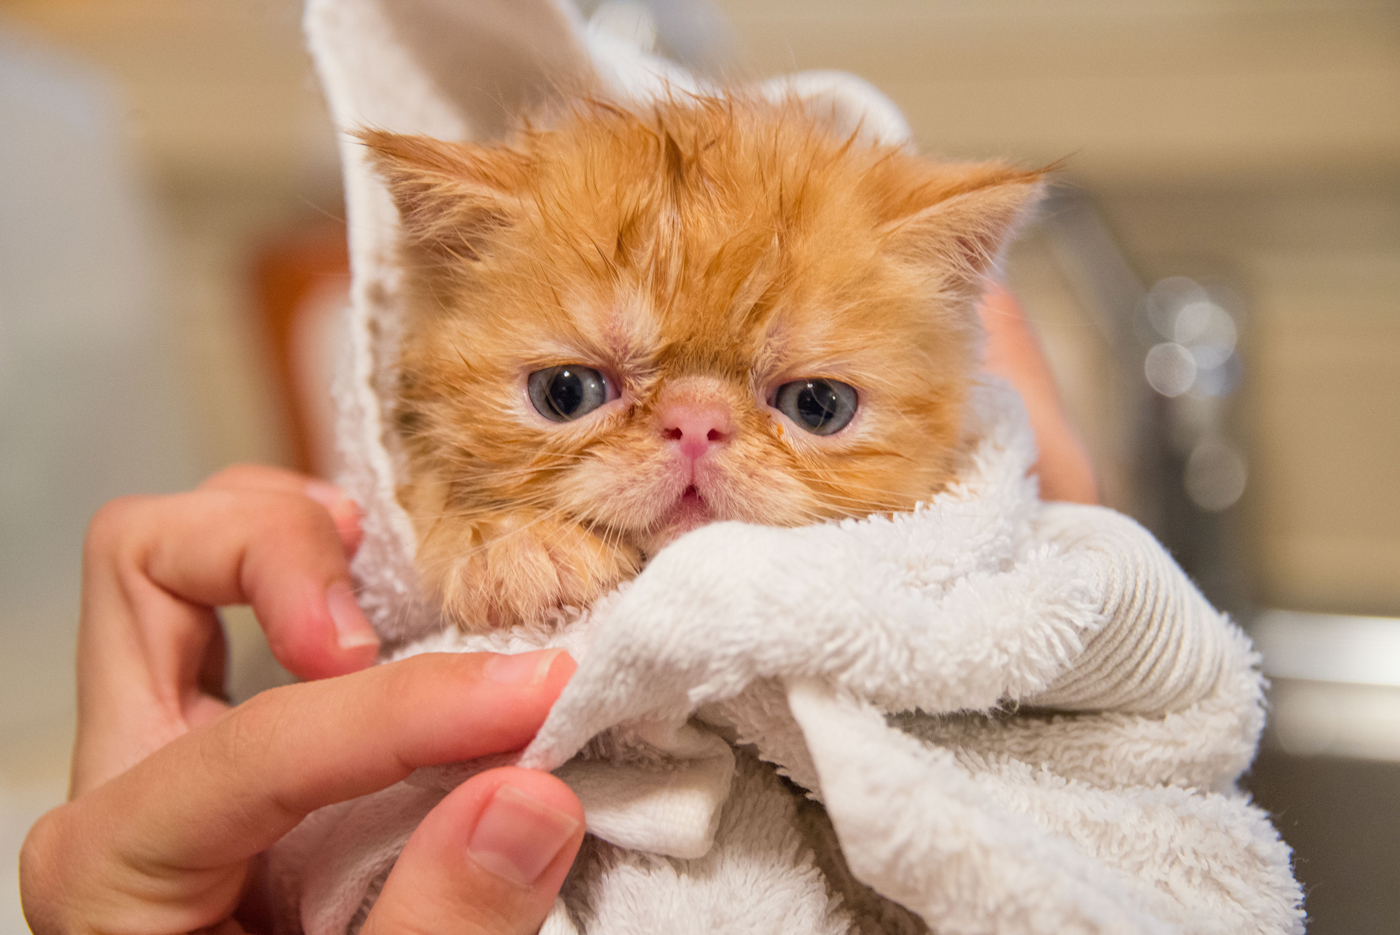 A kitten wrapped up in a towel